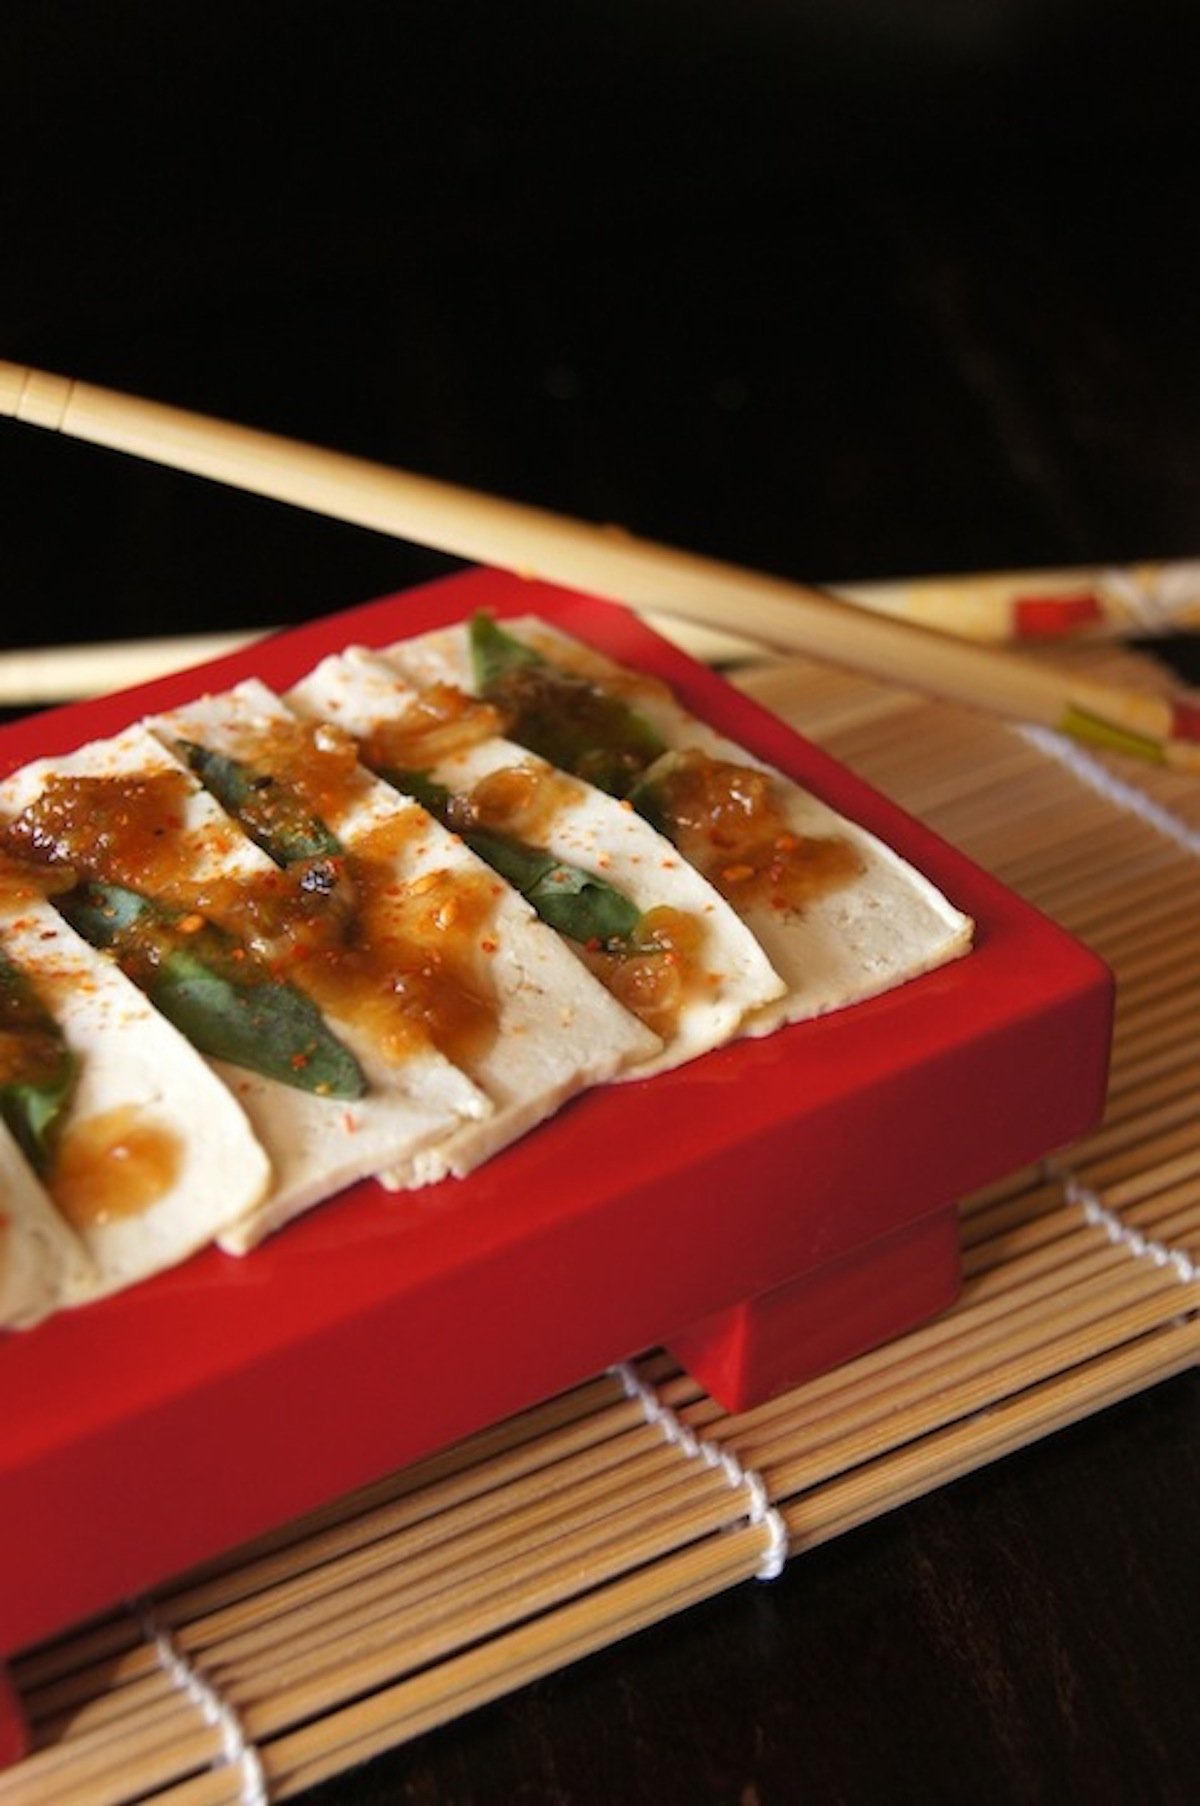 Red retangular plate with very thin slices of tofu withbasil leaves and drizzled sauce.